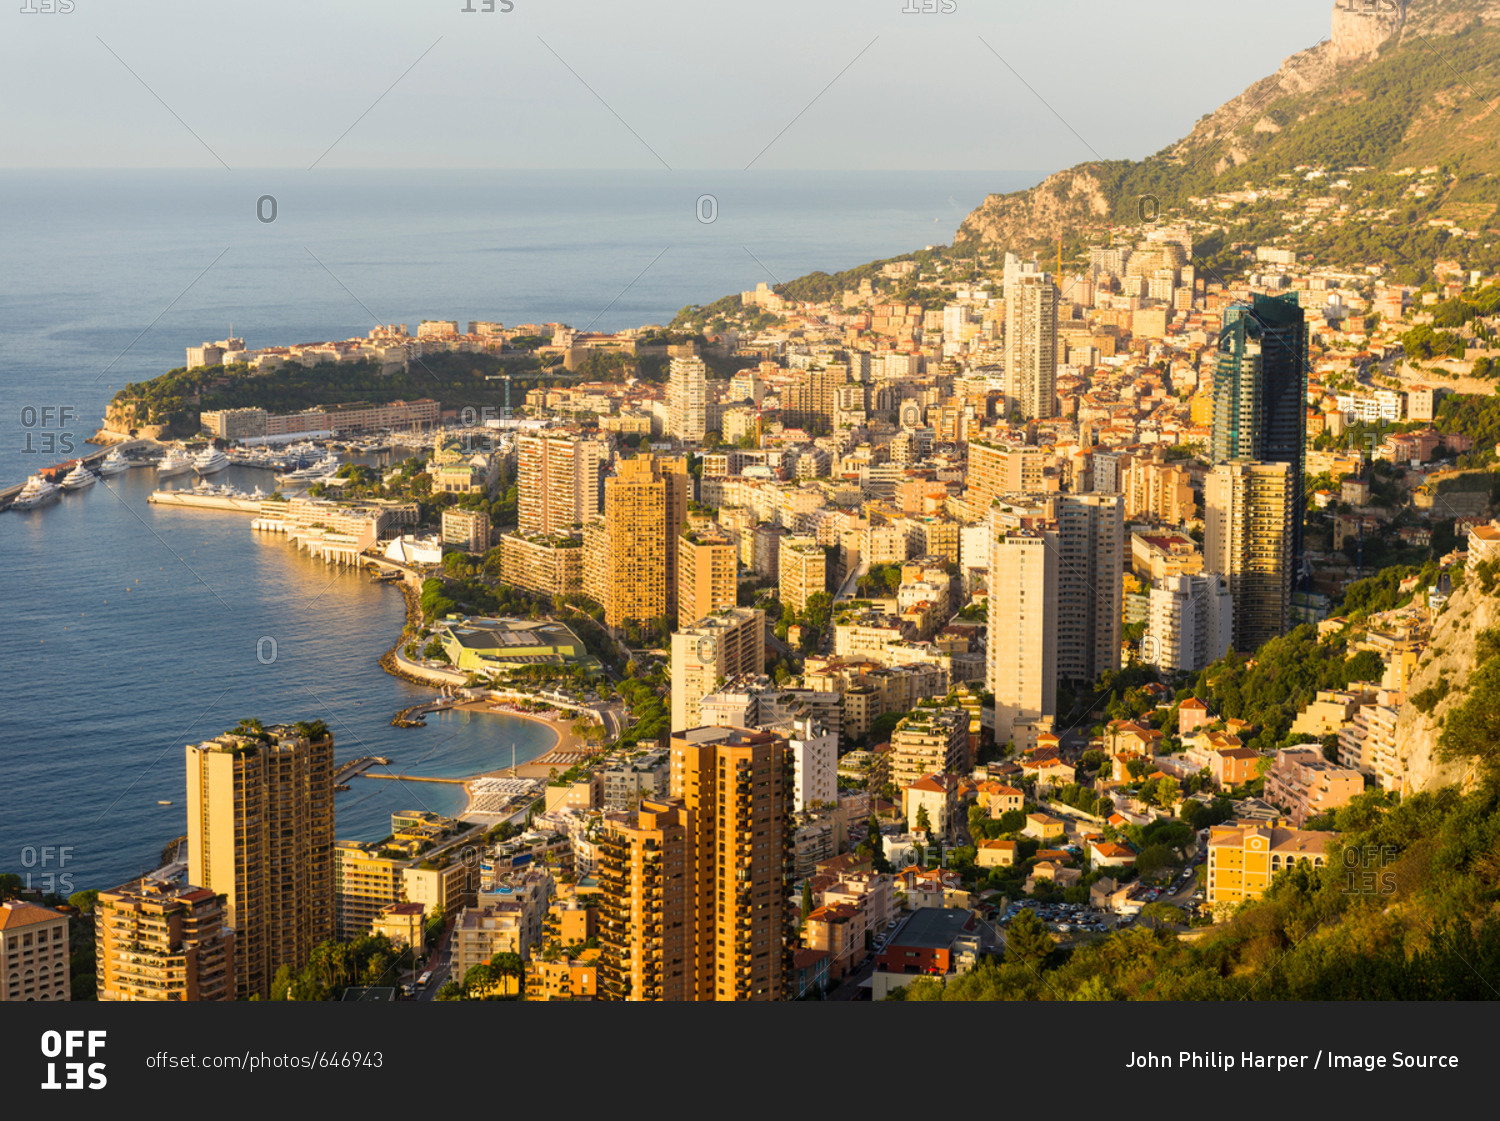 Coastal cityscape with skyscrapers and hotels, Monaco